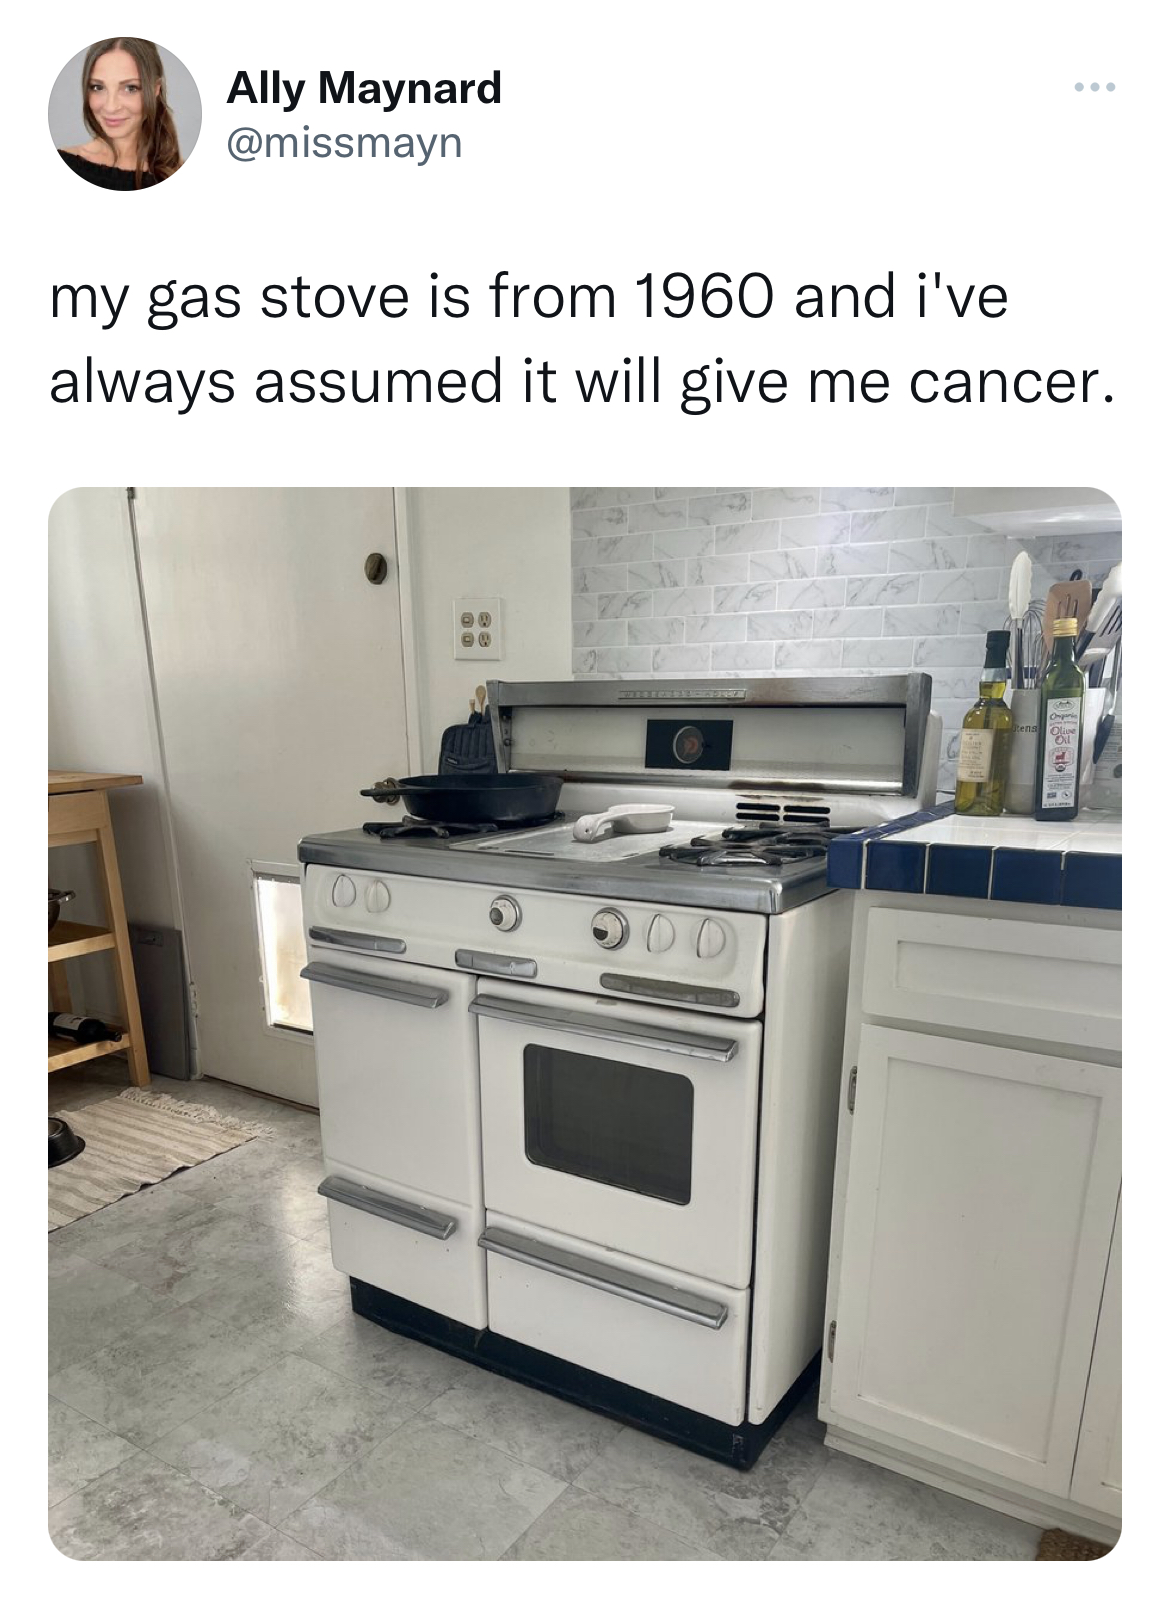 Gas Stove Ban Memes kitchen - Ally Maynard my gas stove is from 1960 and i've always assumed it will give me cancer.